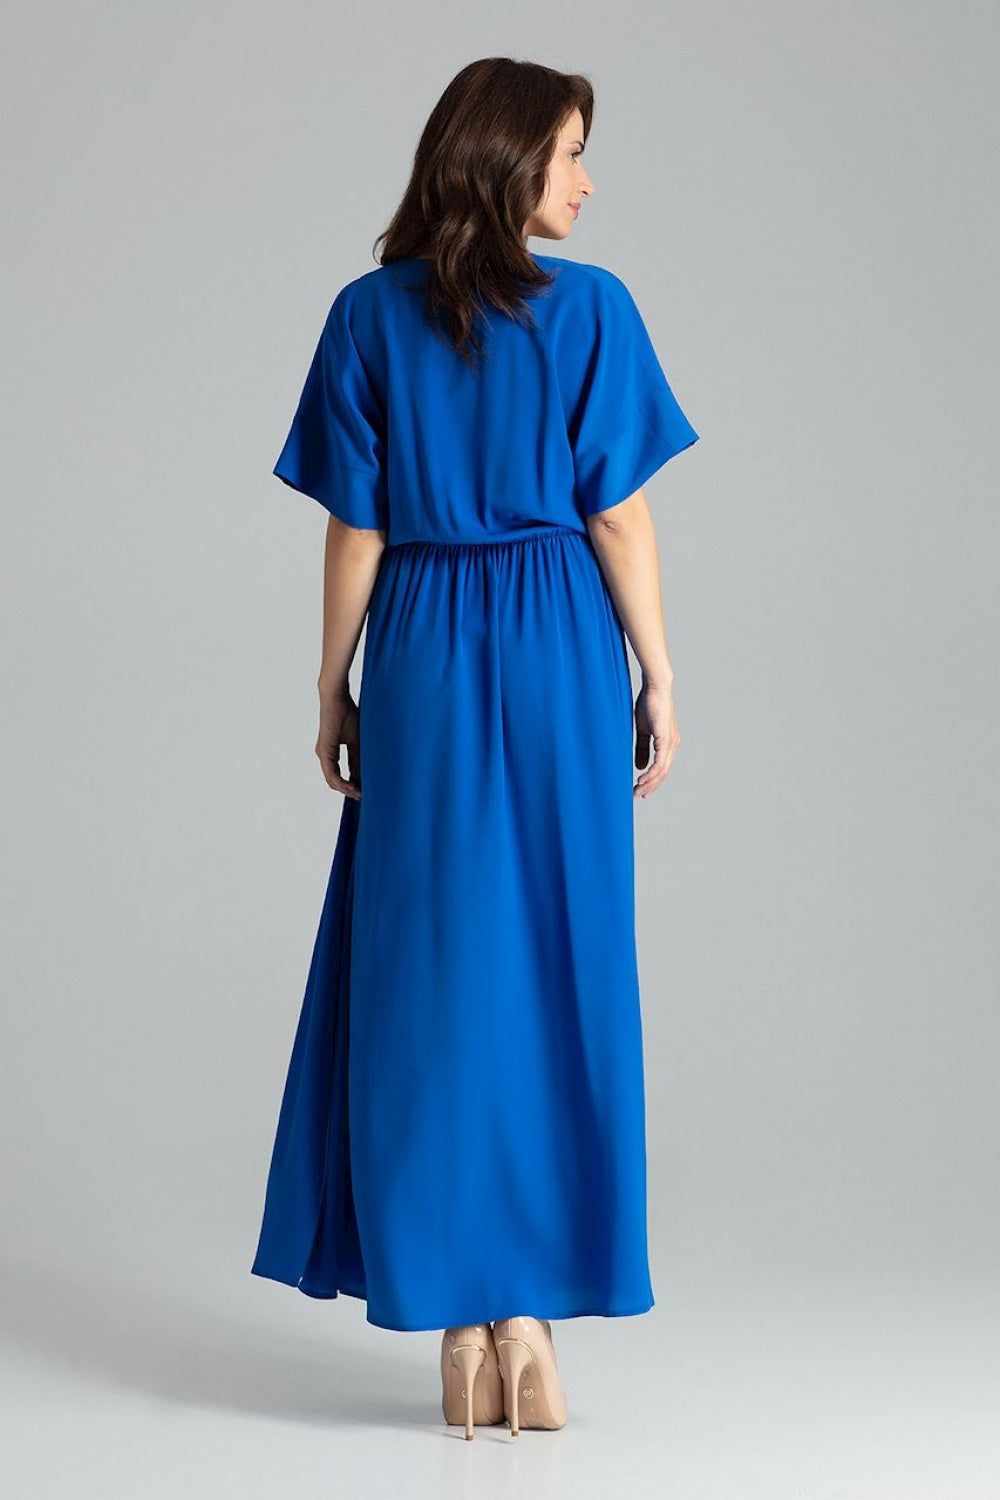 Blue maxi dress with short kimono sleeves, elastic band at the waist, and side slits.